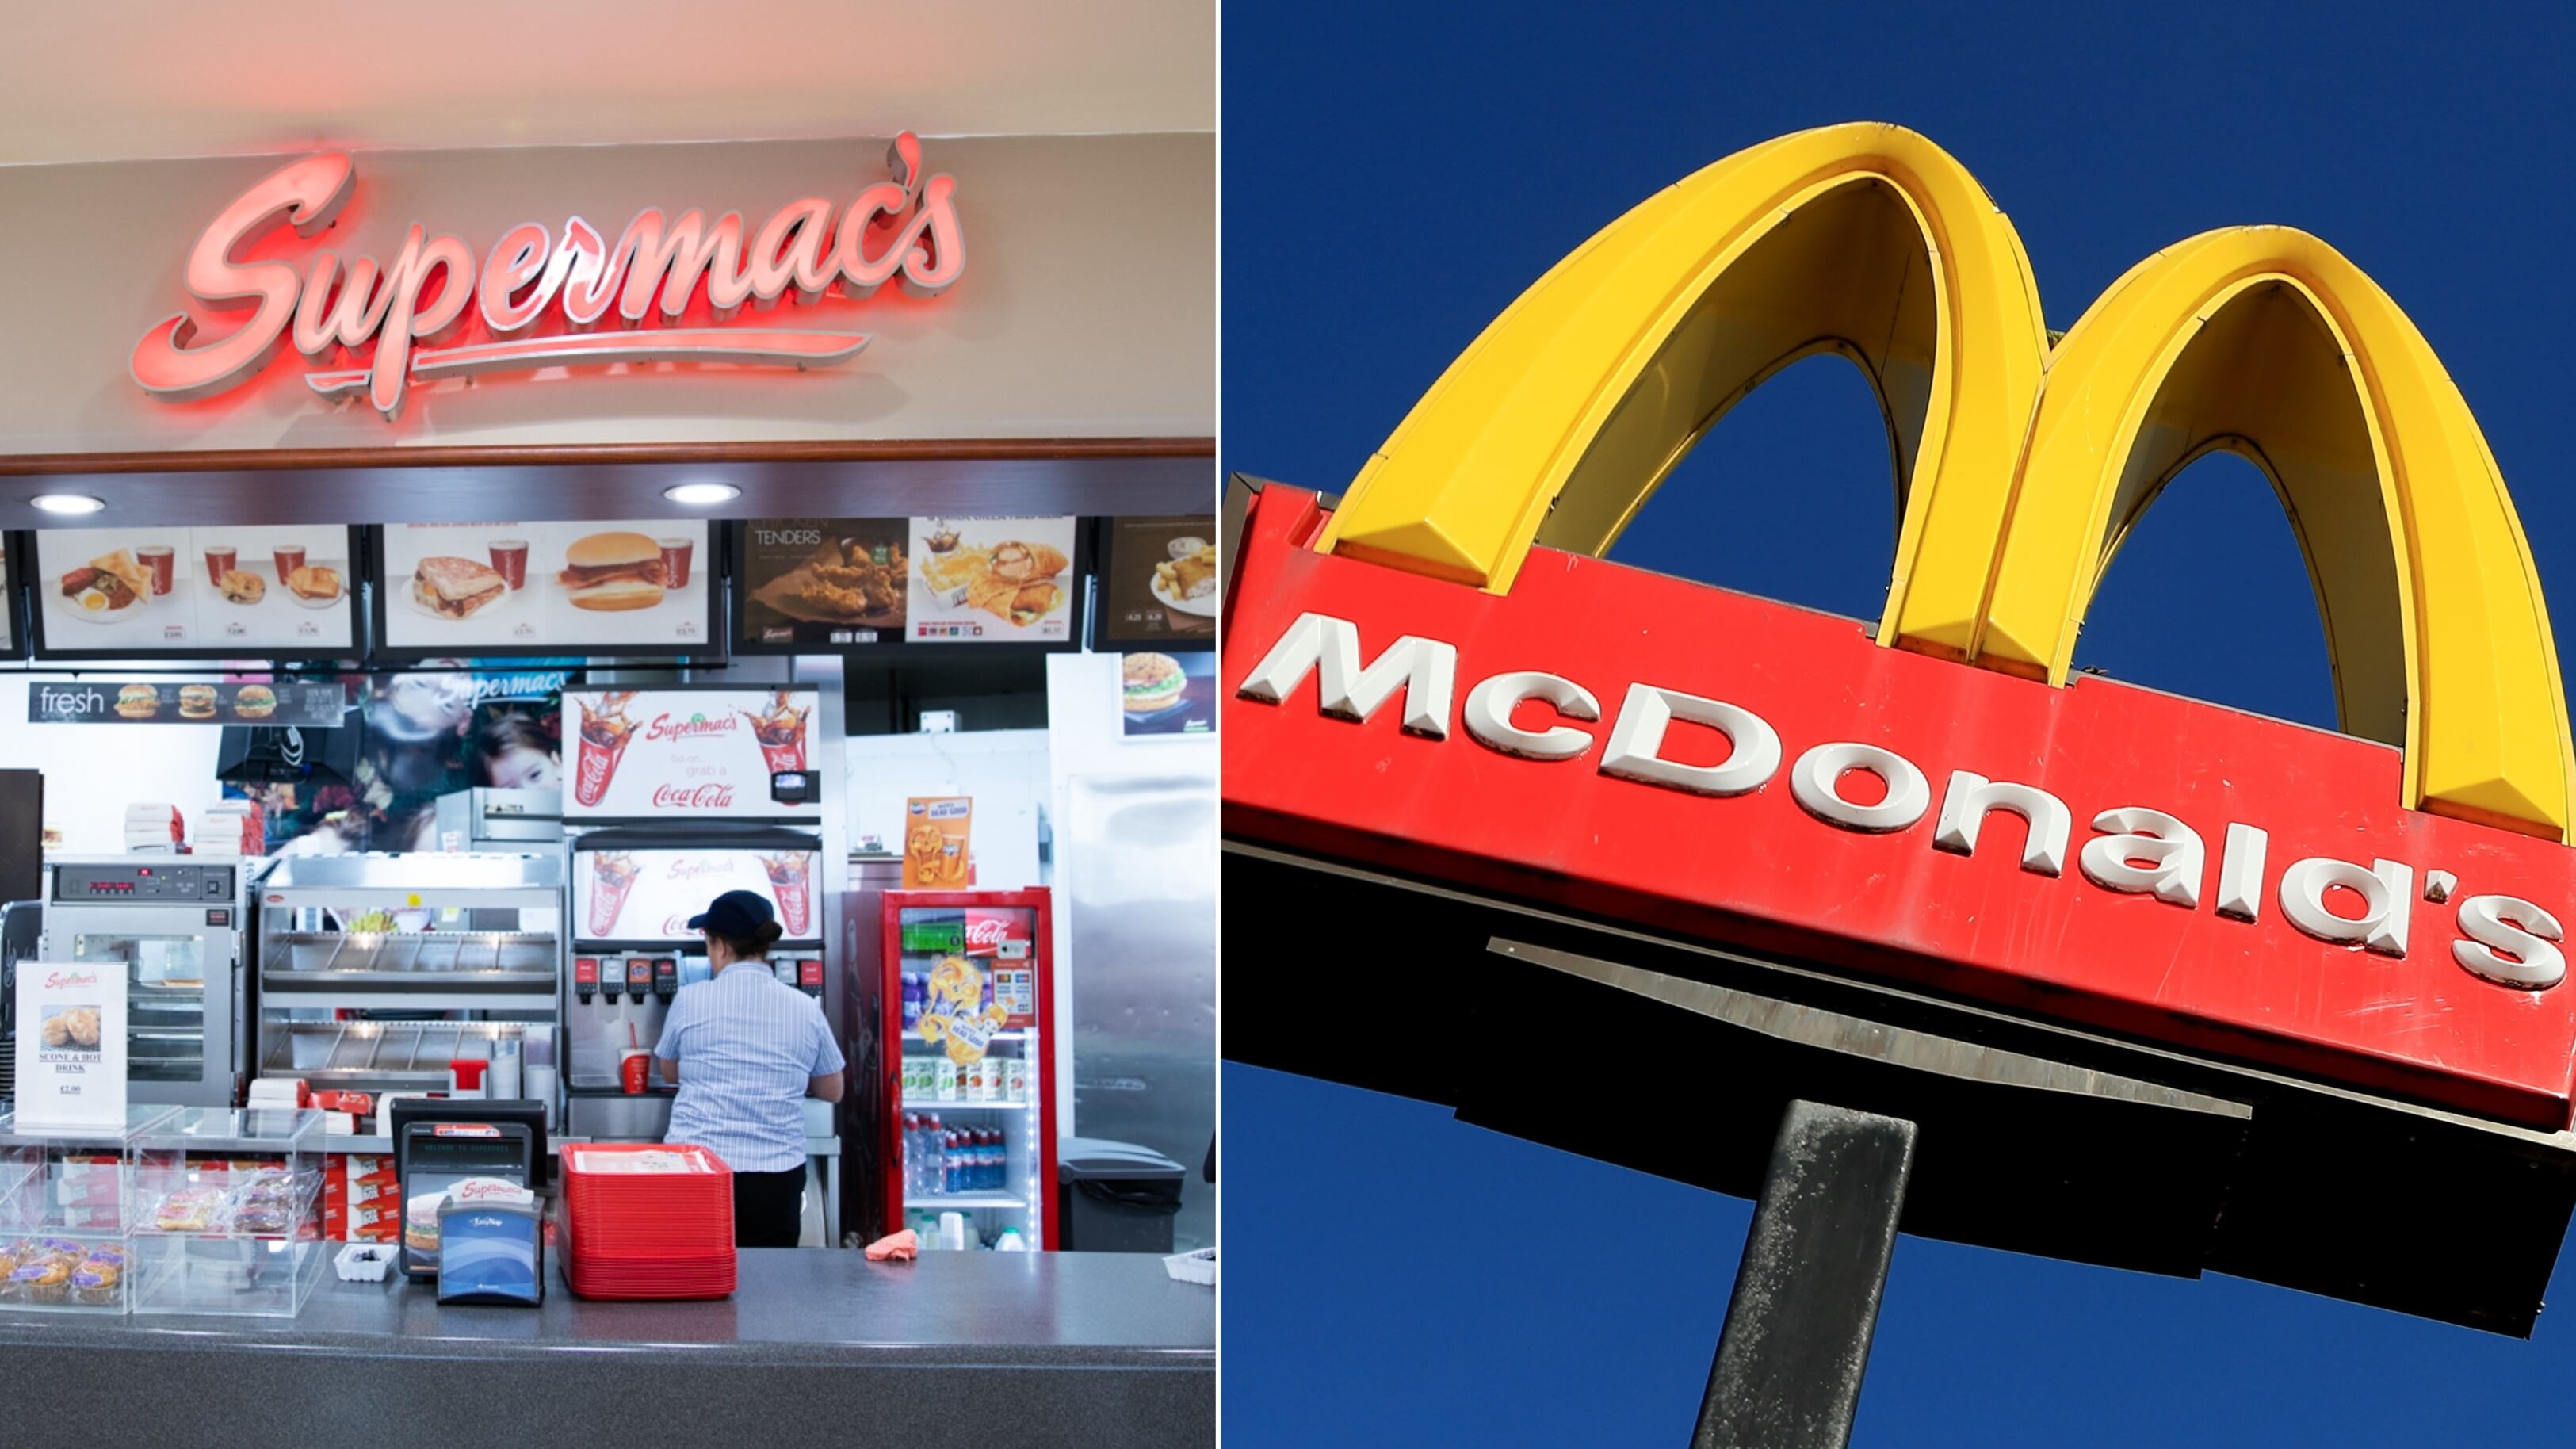 Split image showing Supermac's outlet in Derry's Foyleside and (right), McDonald's golden arches.